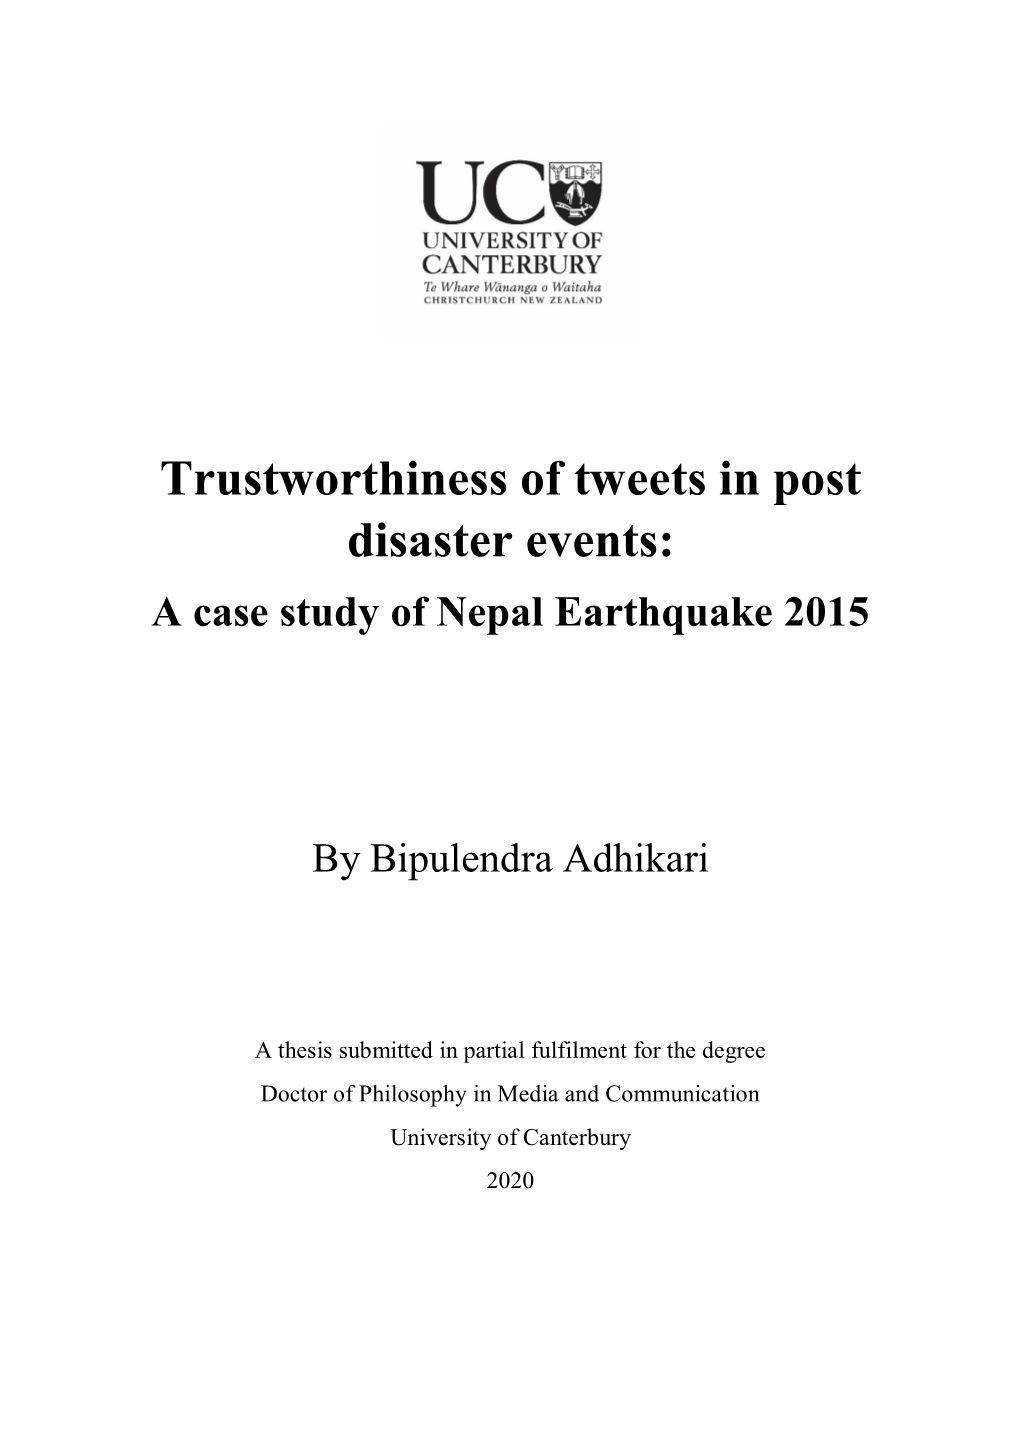 Trustworthiness of Tweets in Post Disaster Events: a Case Study of Nepal Earthquake 2015